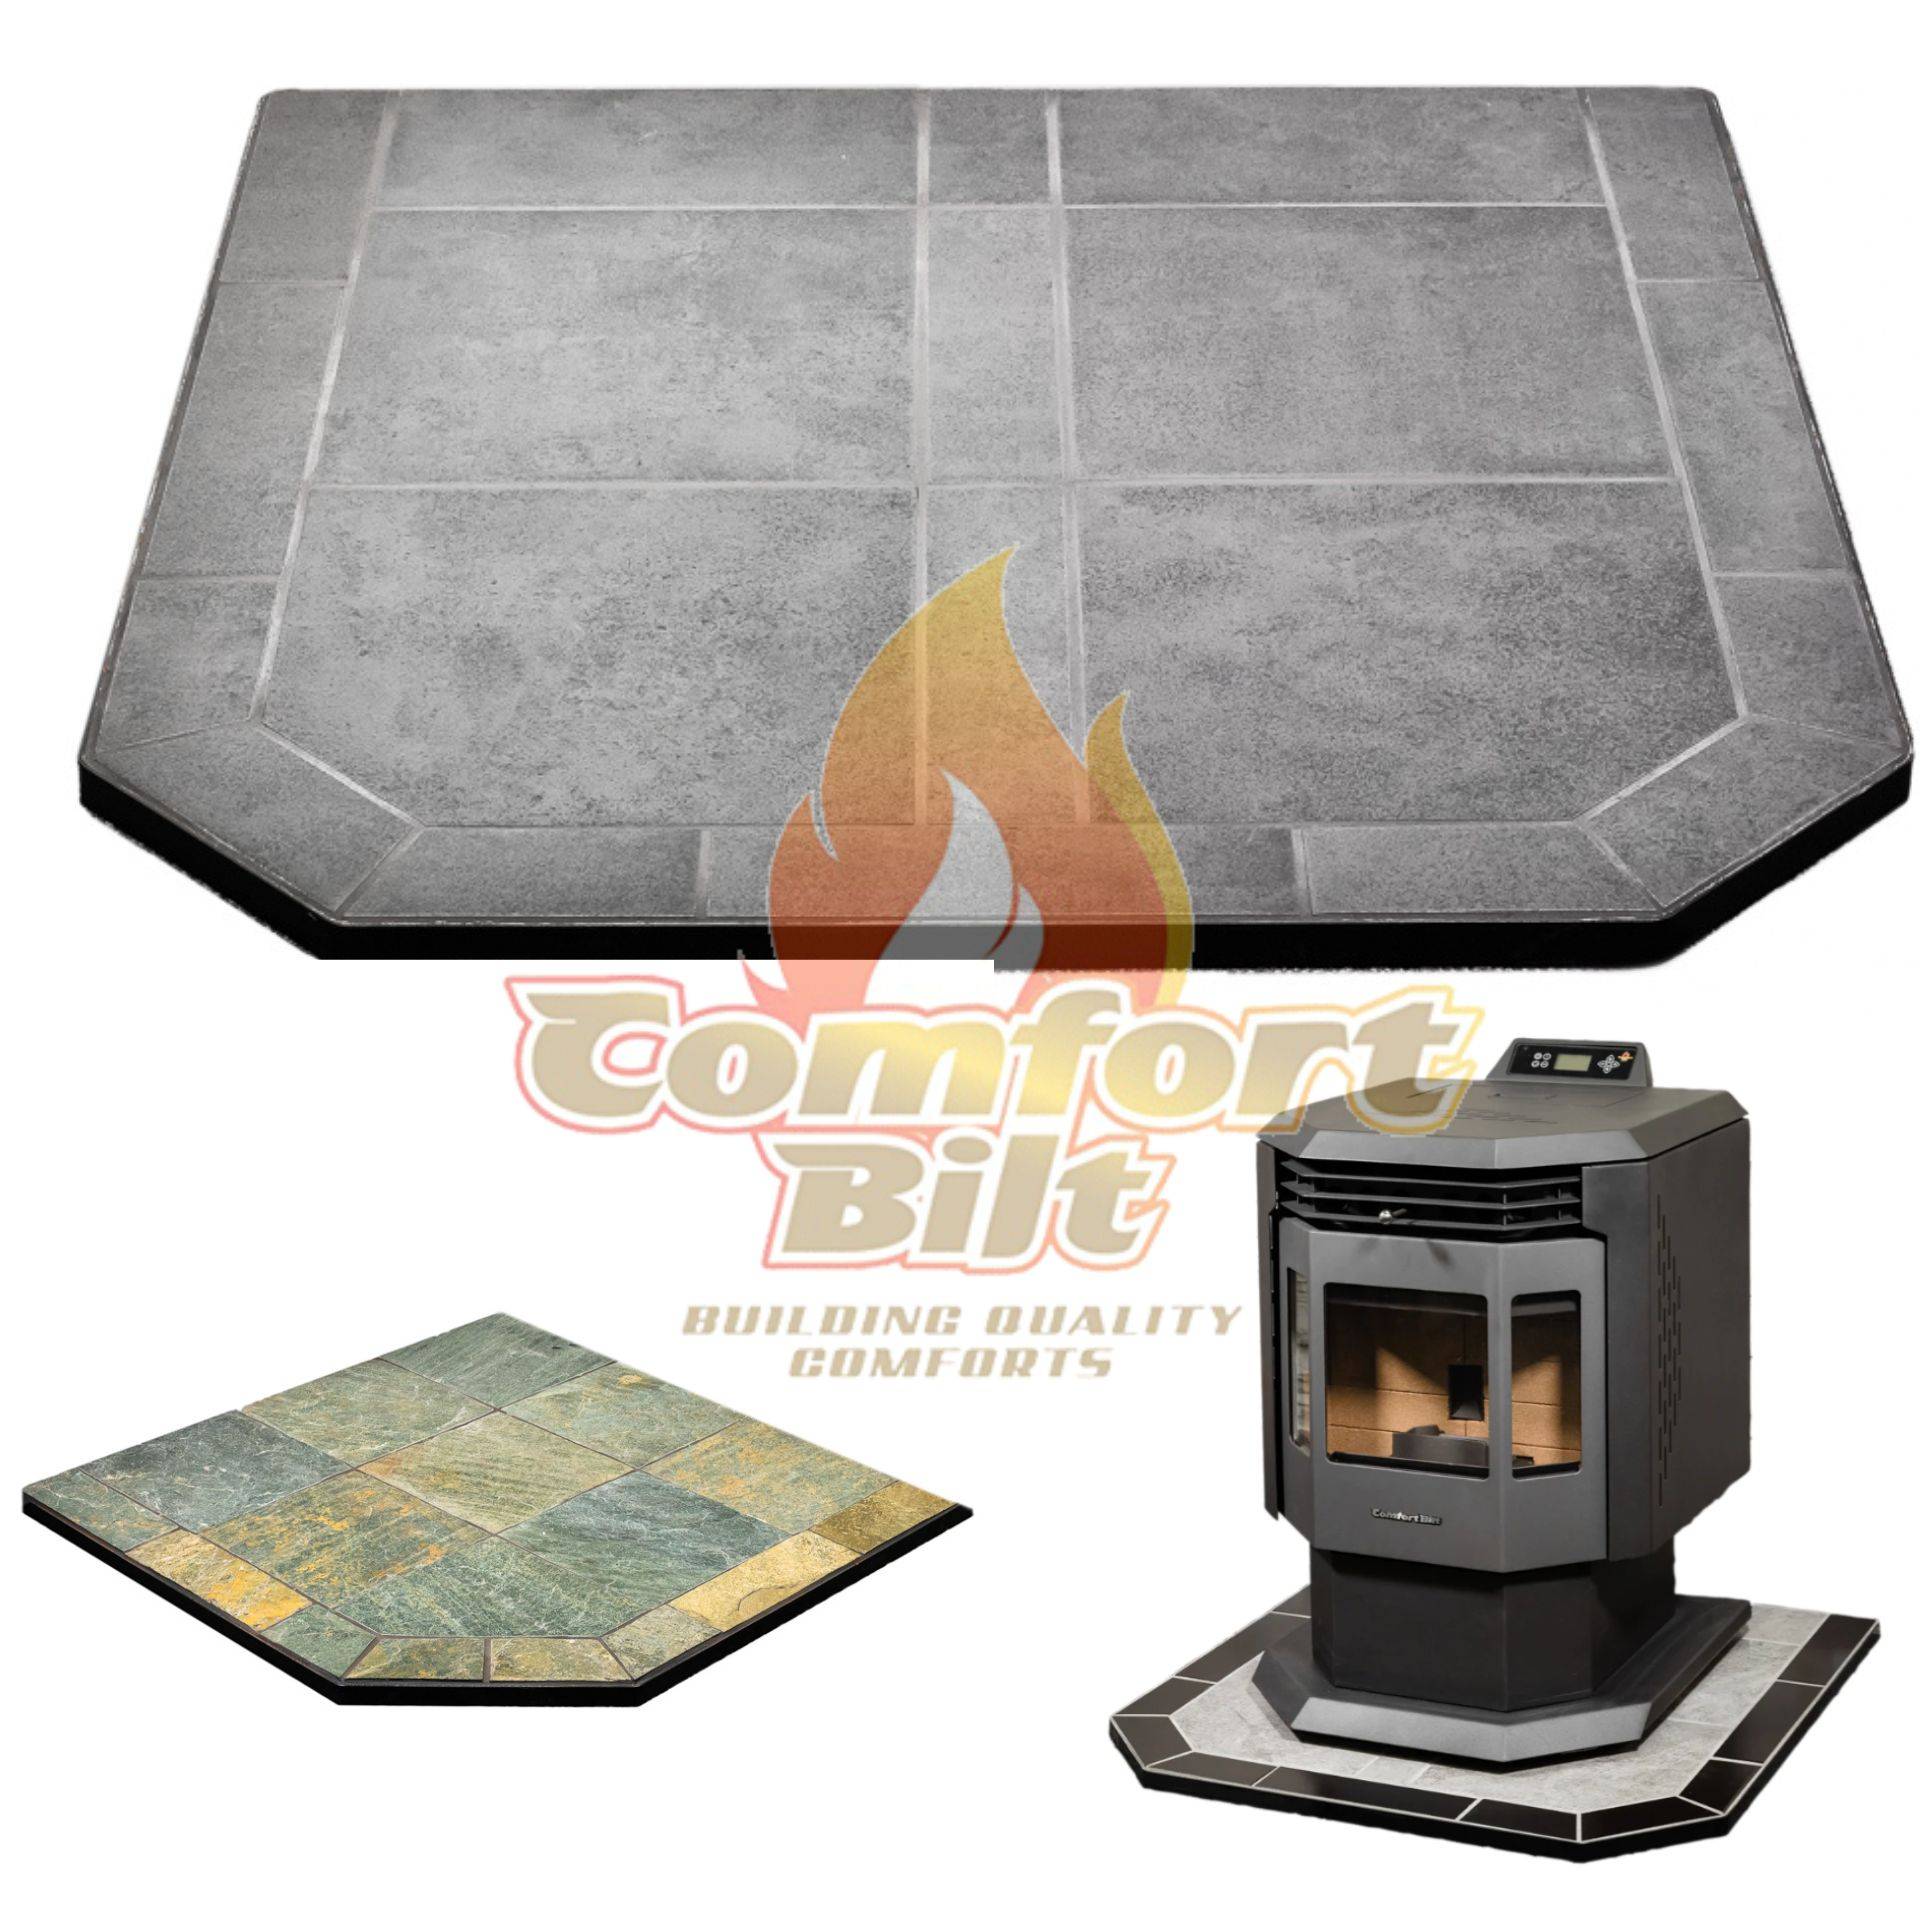 The Spruce Pellet stove reviews Comfortbilt pellet stoves are consistently highly ranked